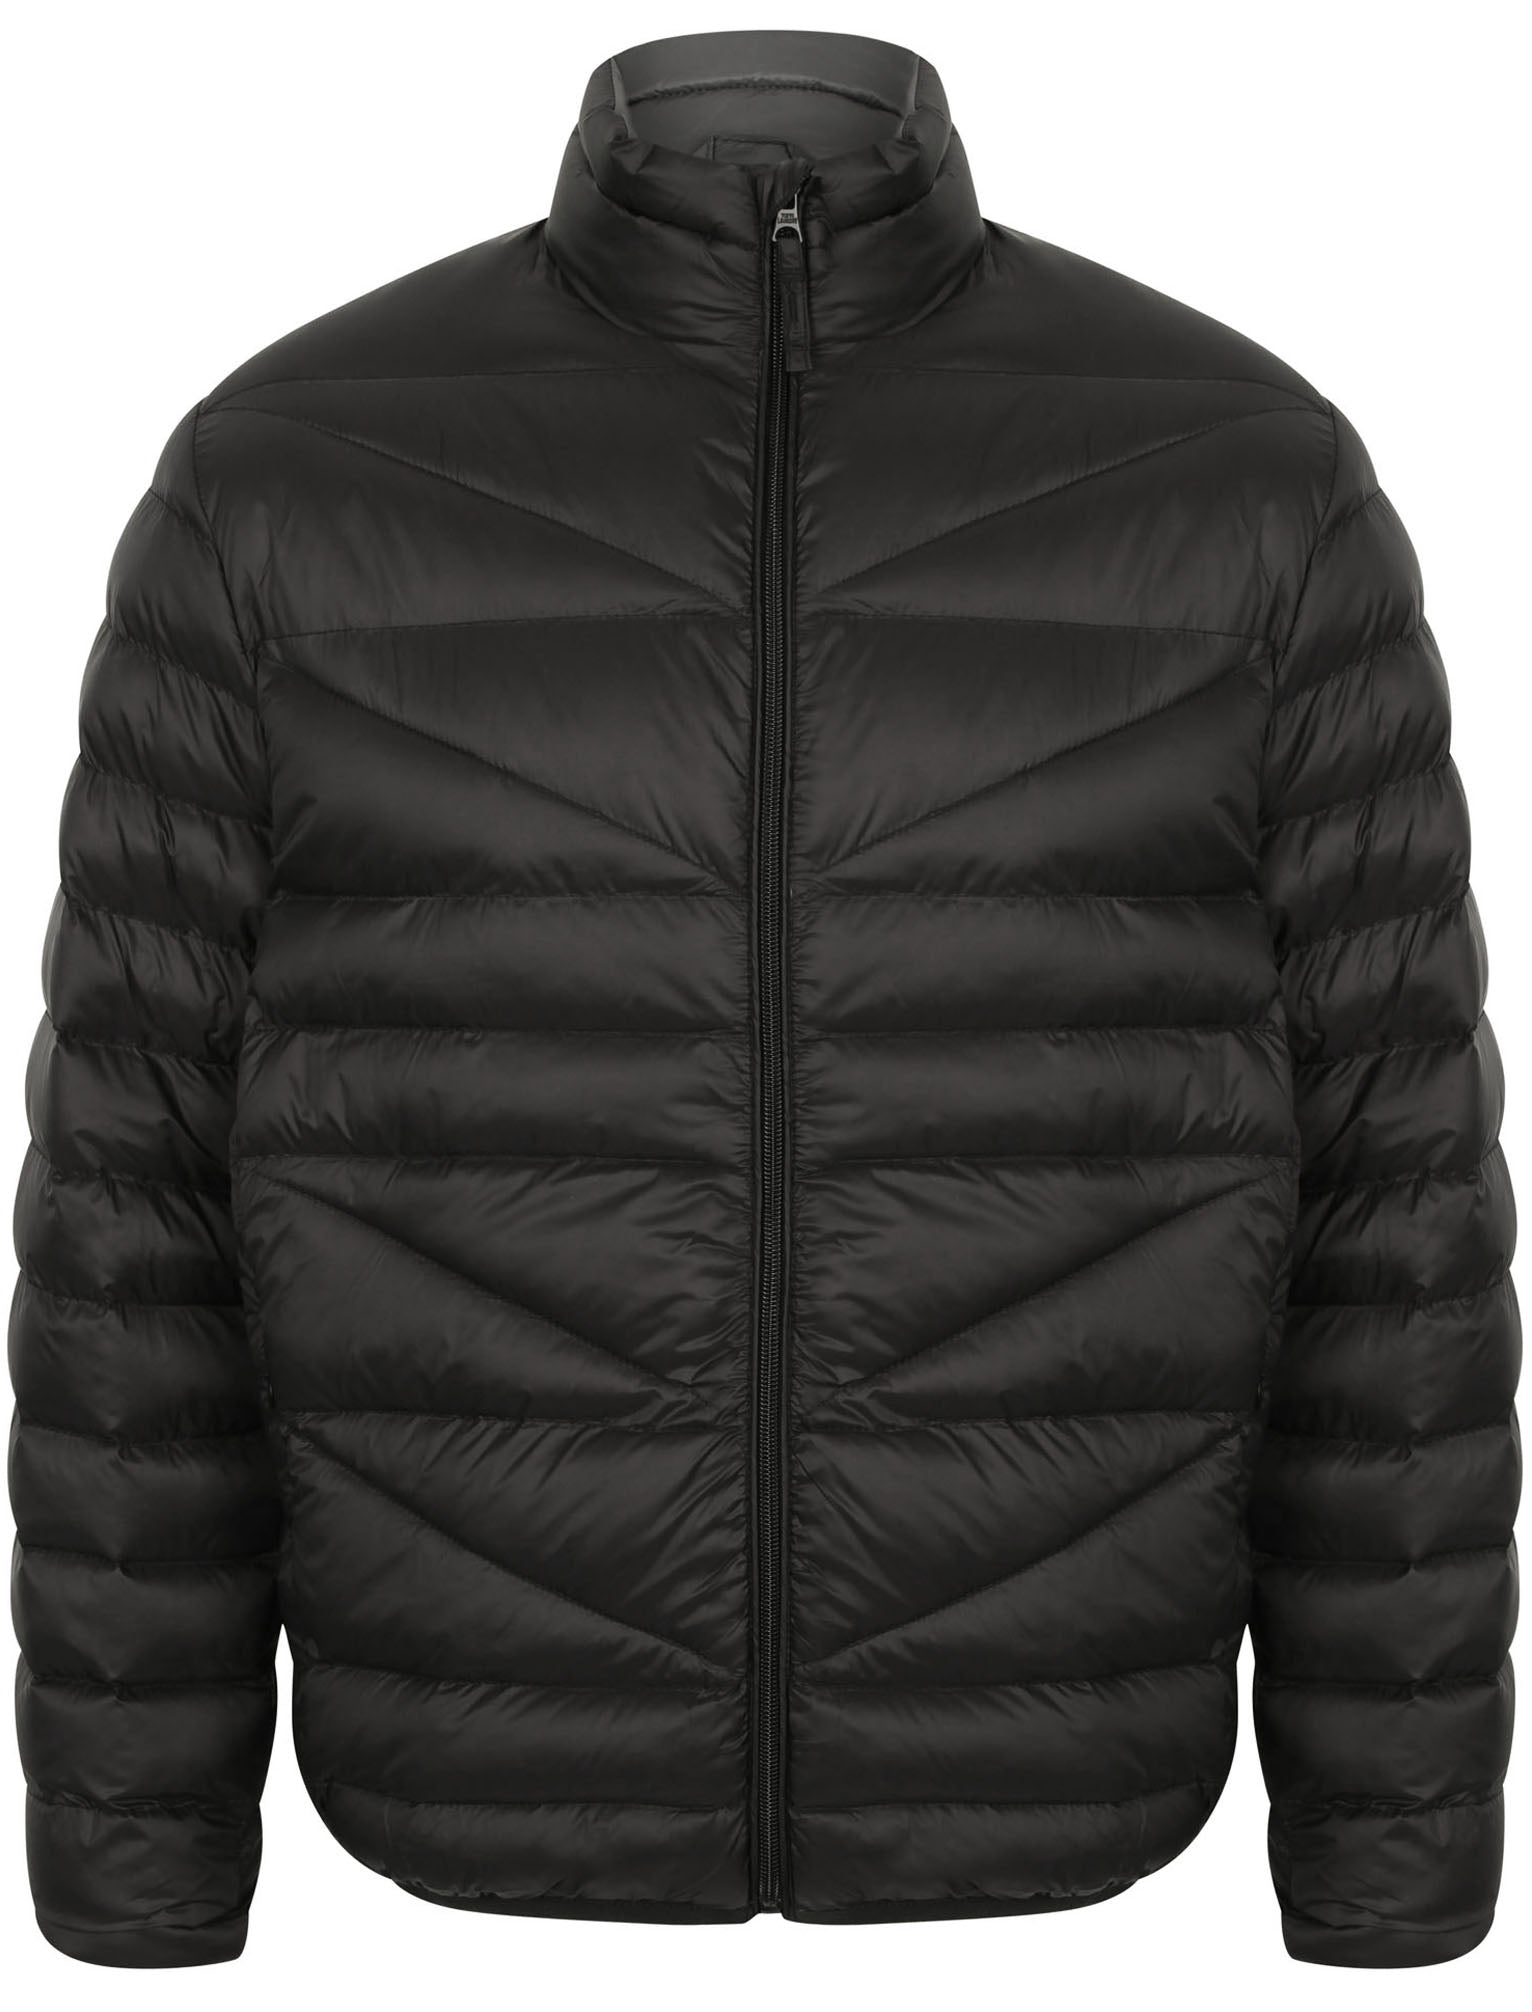 coats / jackets naylor funnel neck quilted jacket in black / m - tokyo laundry